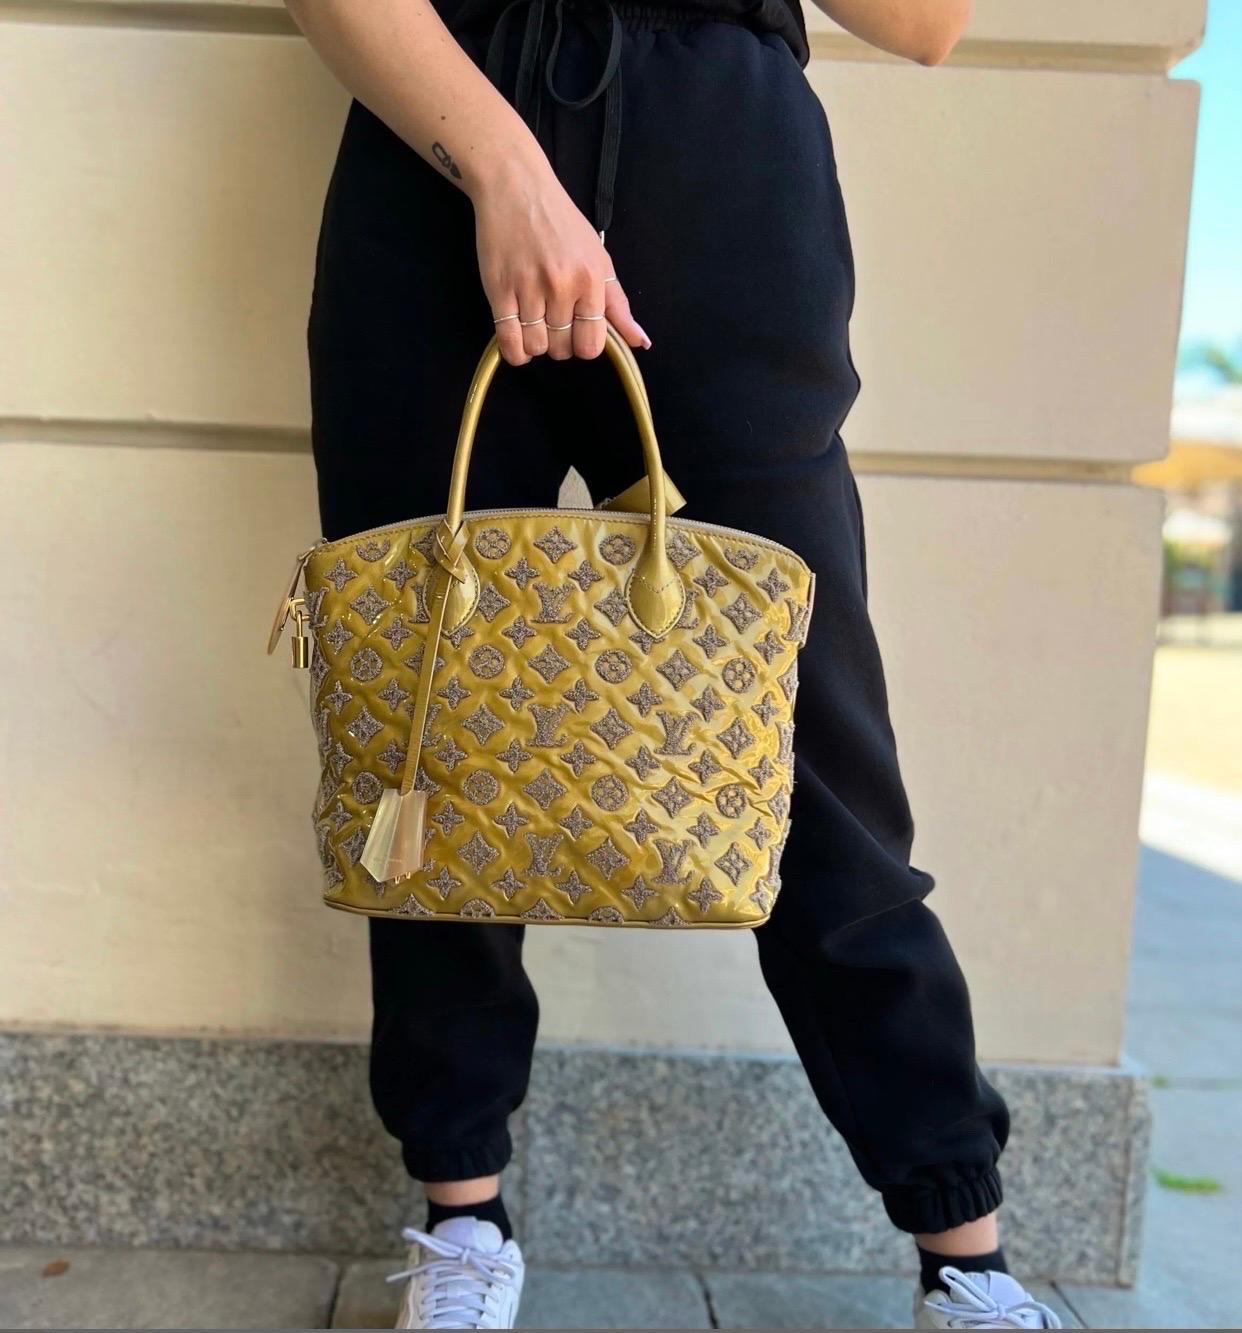 Louis Vuitton lockit model limited edition gray bag, made of yellow ocher patent lambskin and bouclé wool logos.

Clochette and tongue in mother of pearl. Equipped with double leather handle. Zip closure.

Internally lined in leather, very roomy.